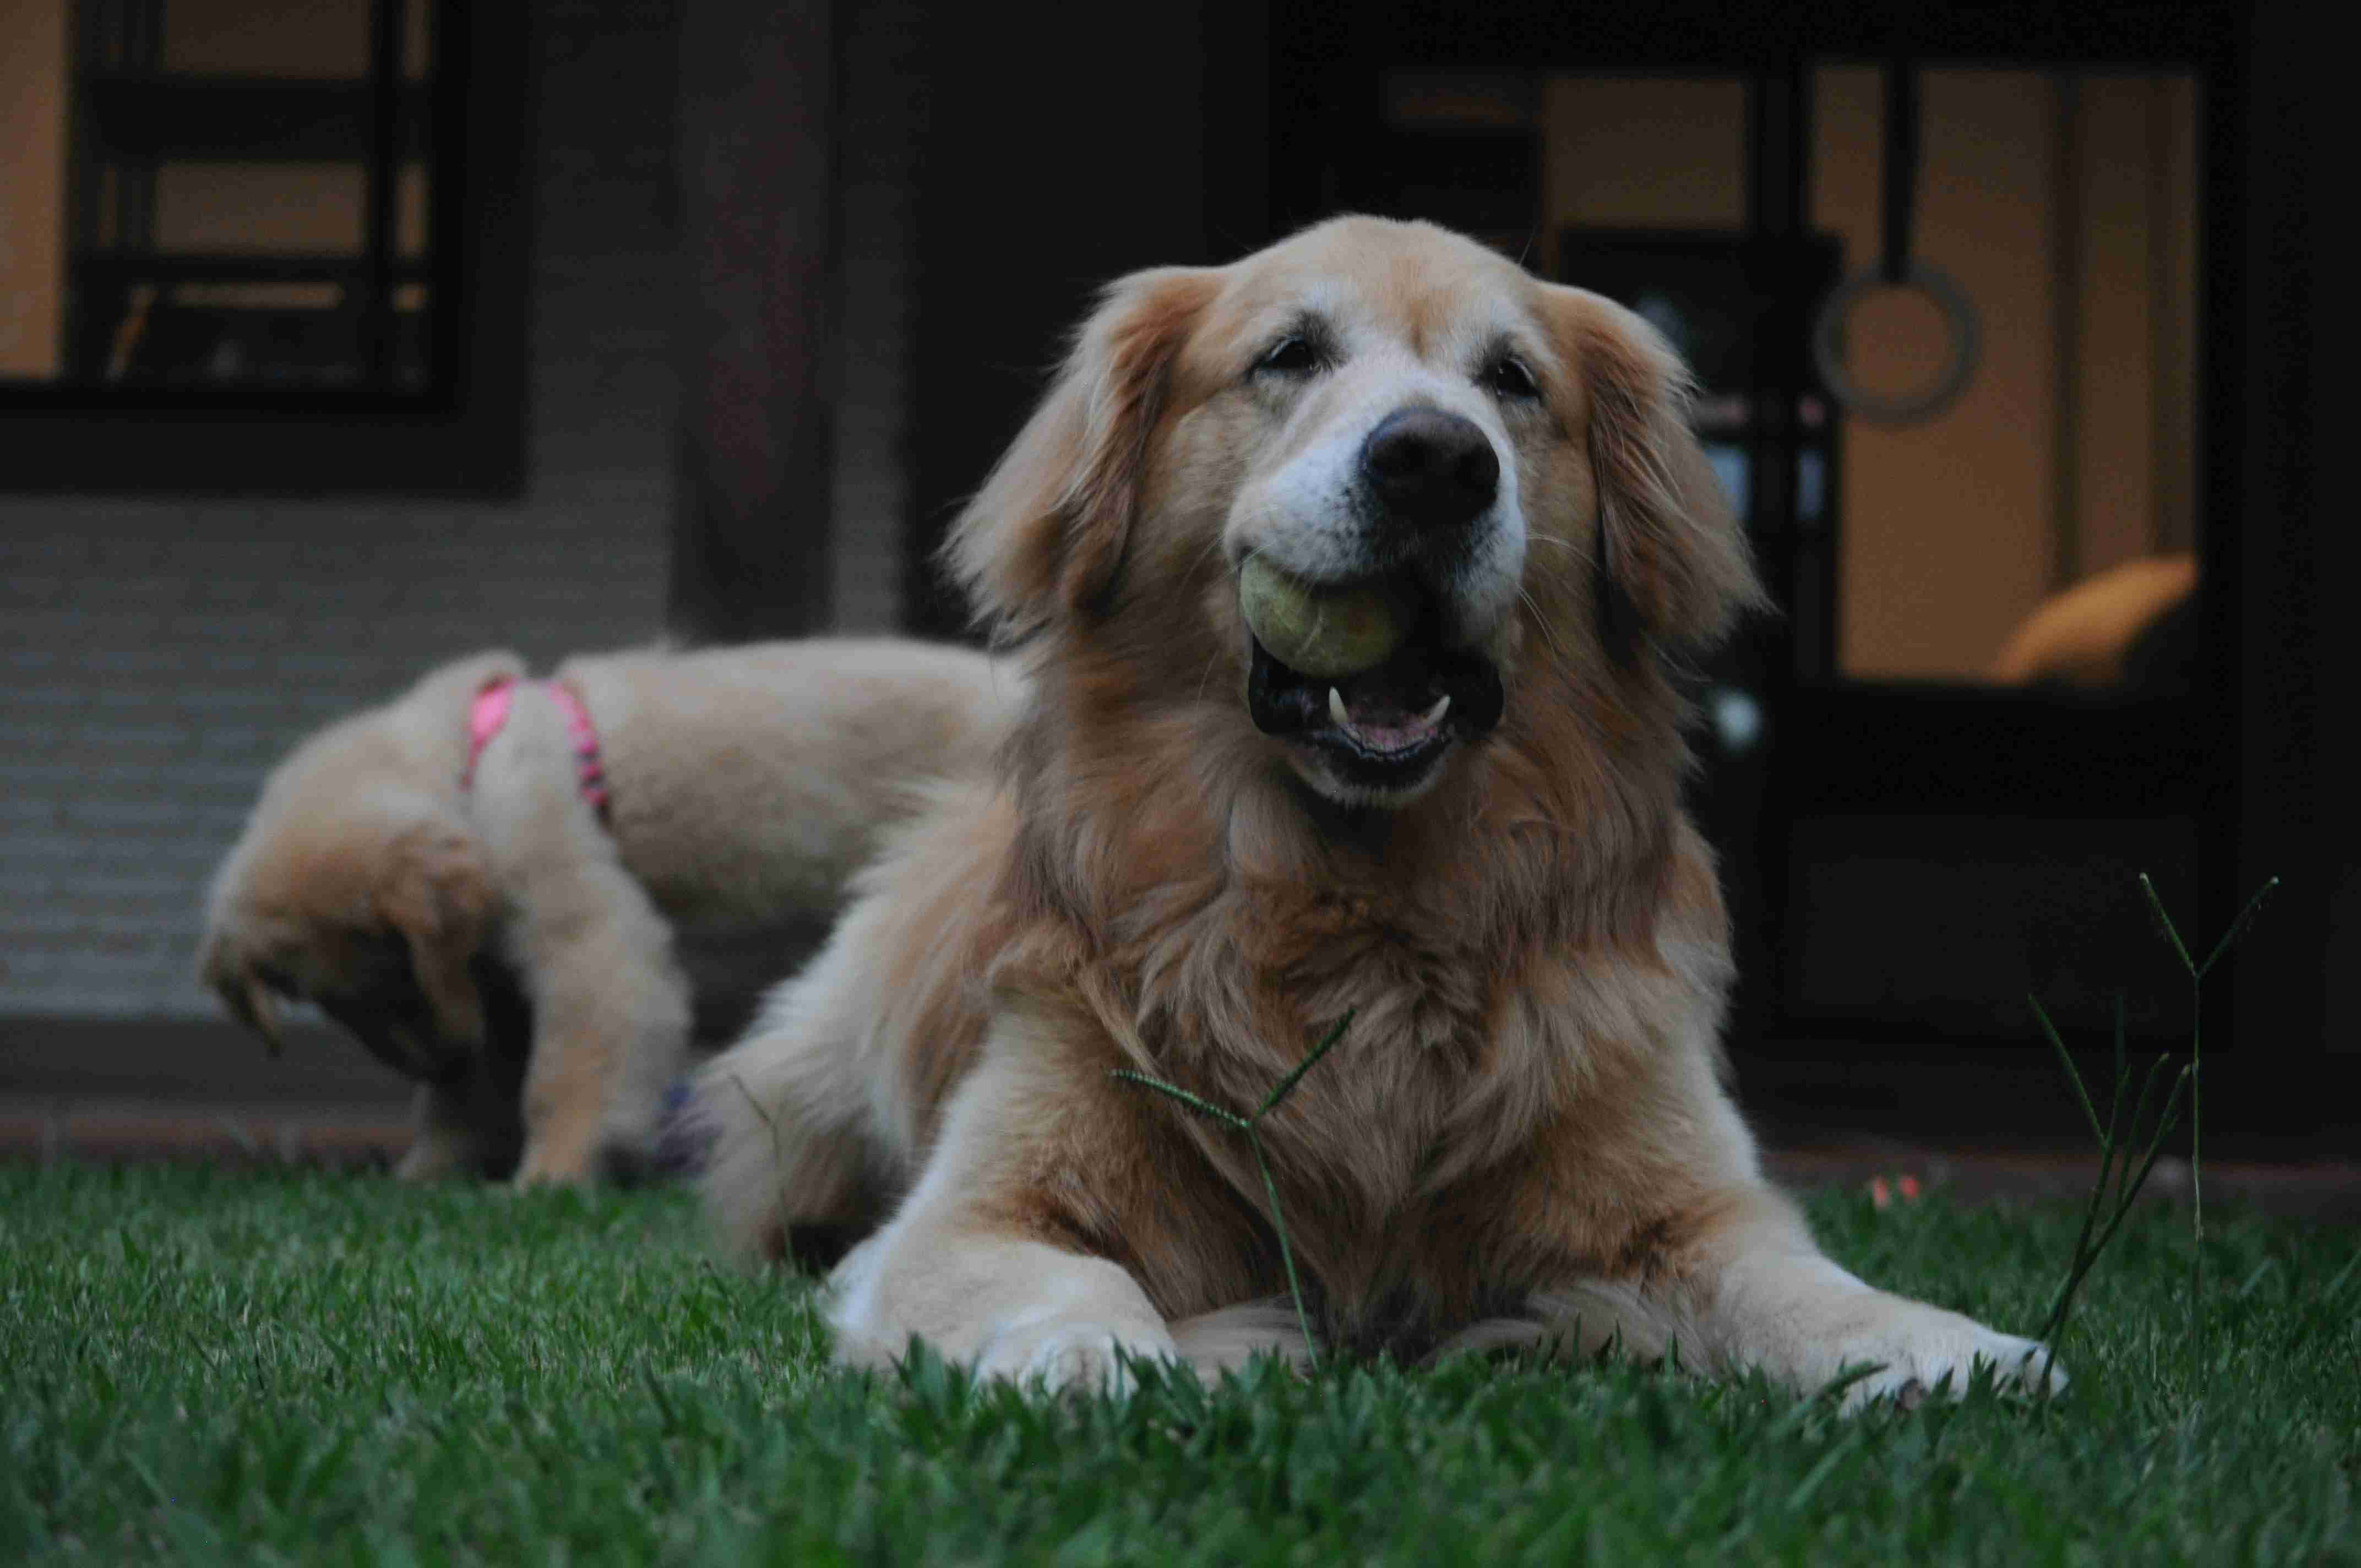 Are golden retrievers prone to any specific gastrointestinal issues?